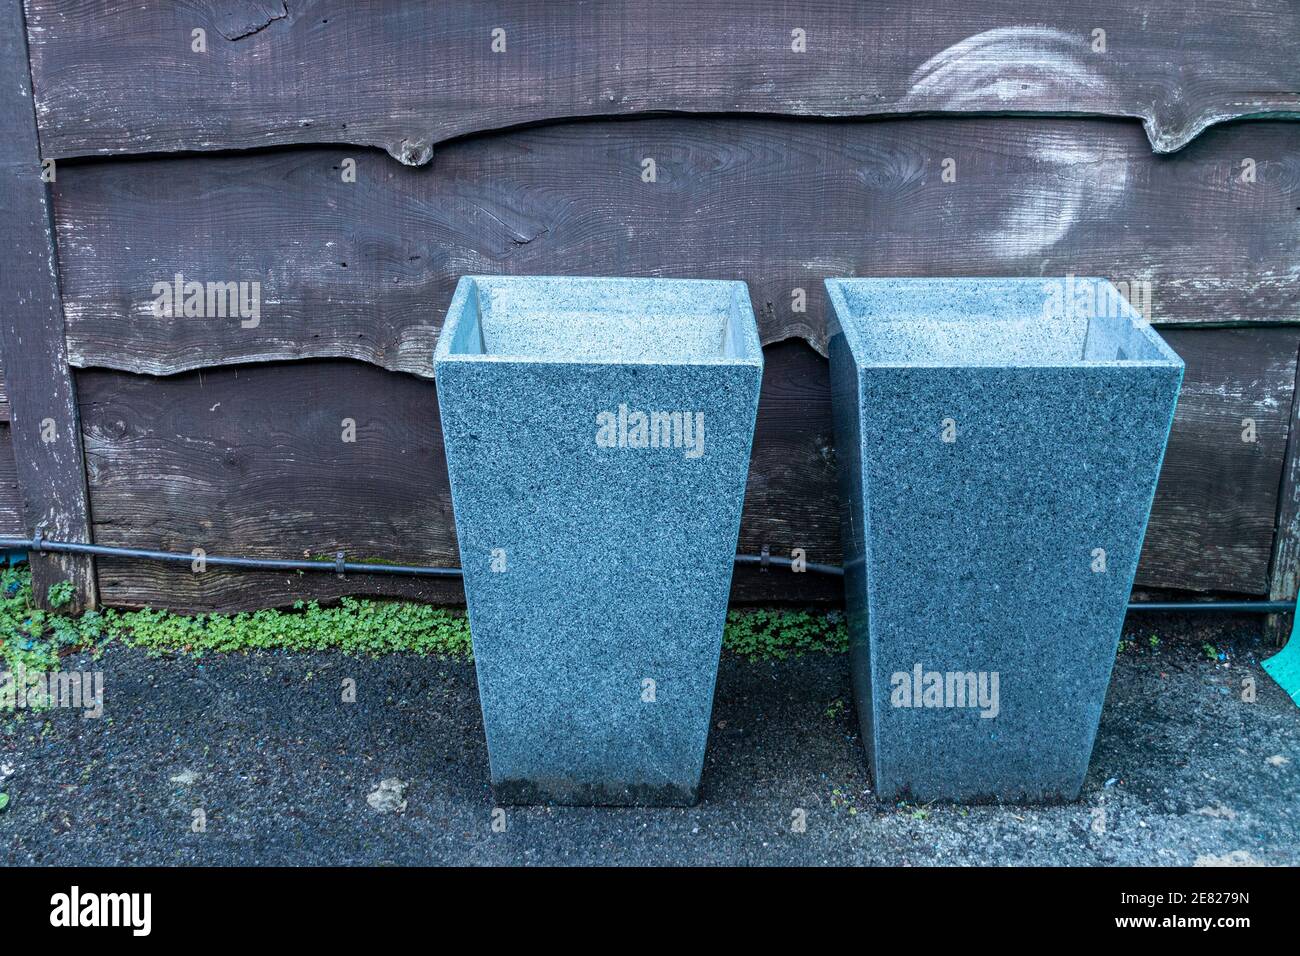 a close up view of two granite plant pots sitting new to a wooden fence Stock Photo